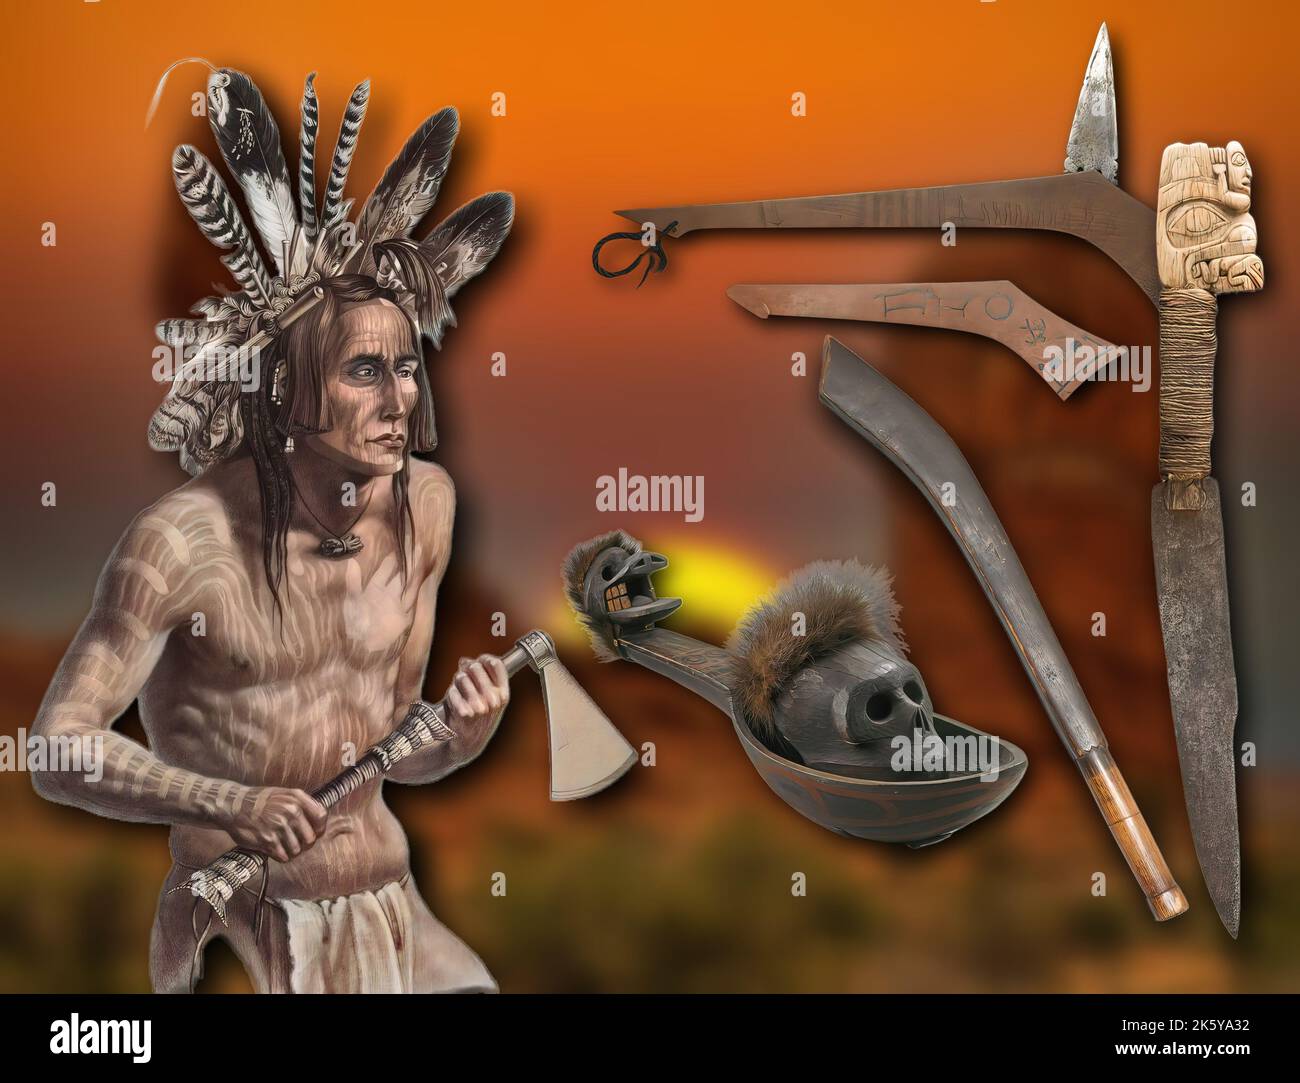 Native American Culture - A collection of weapons Stock Photo